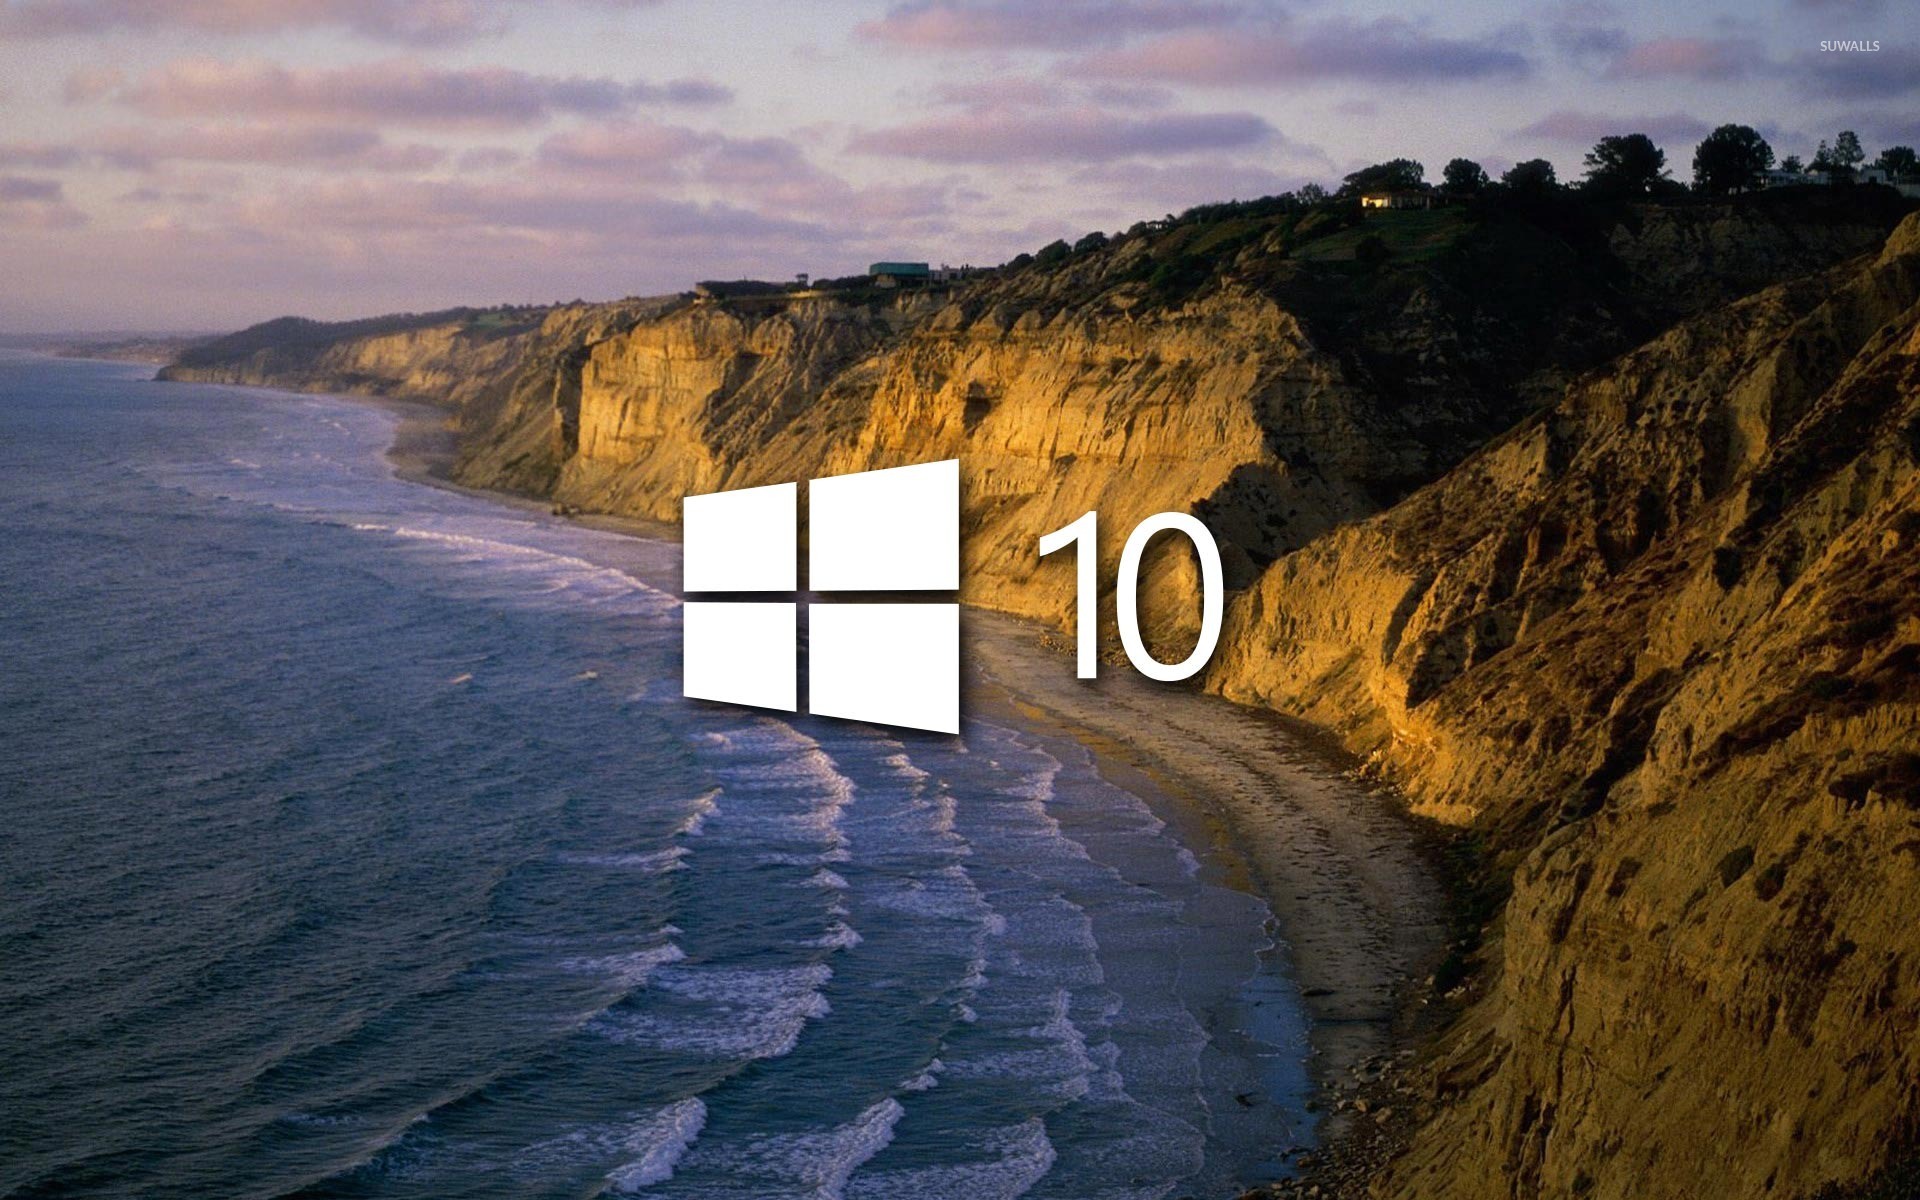 Windows 10 on the shore simple logo wallpaper   Computer wallpapers